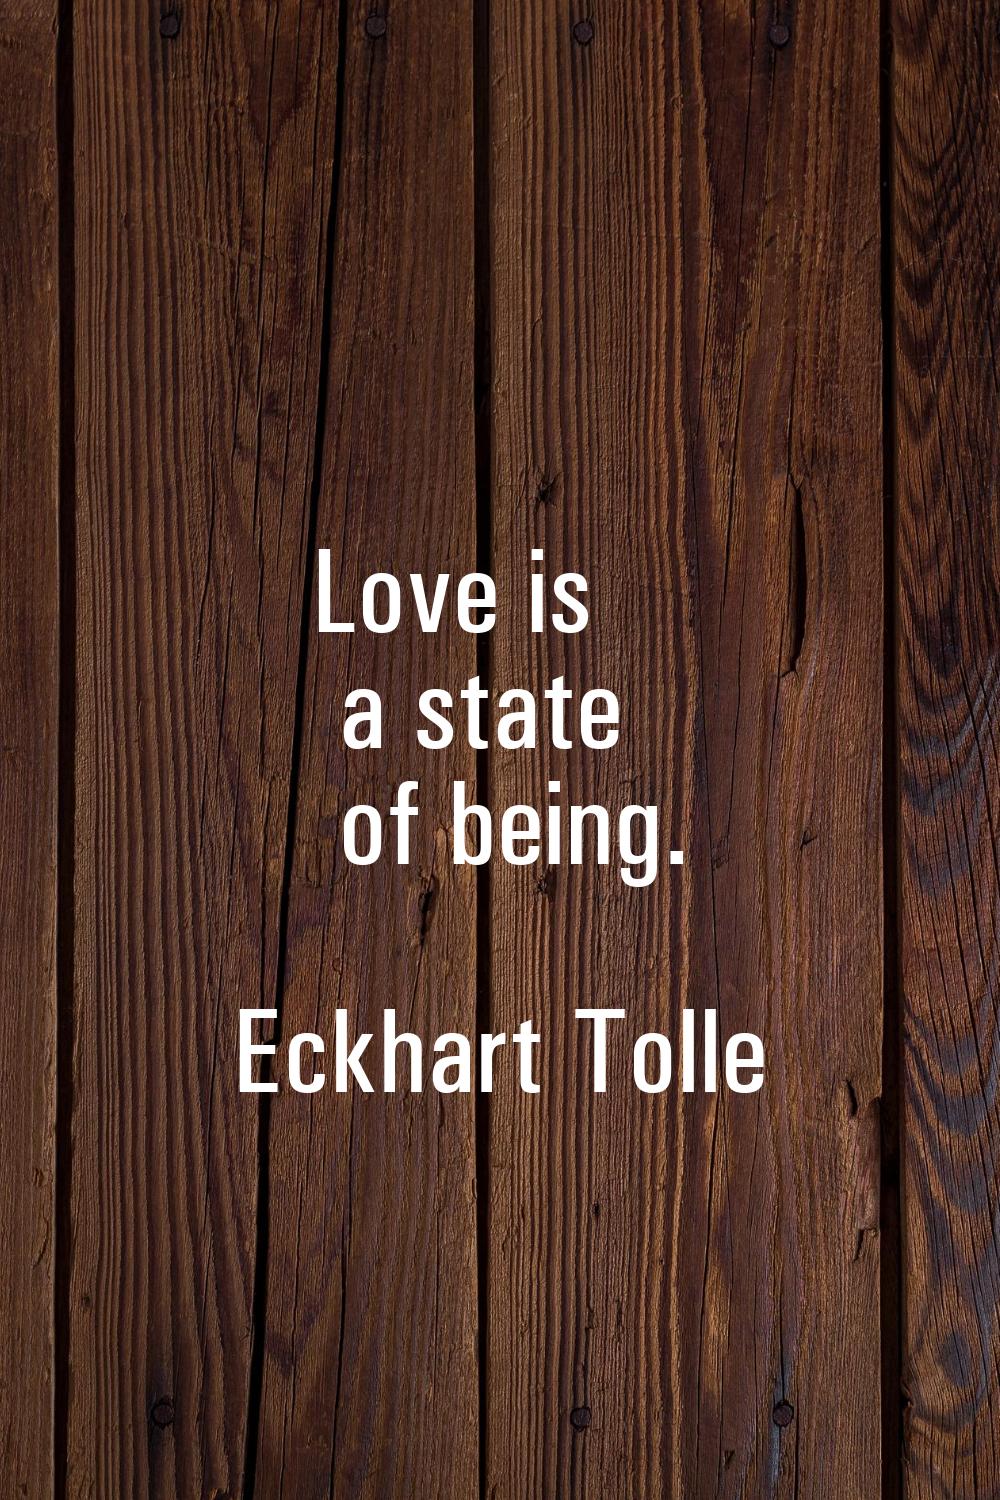 Love is a state of being.